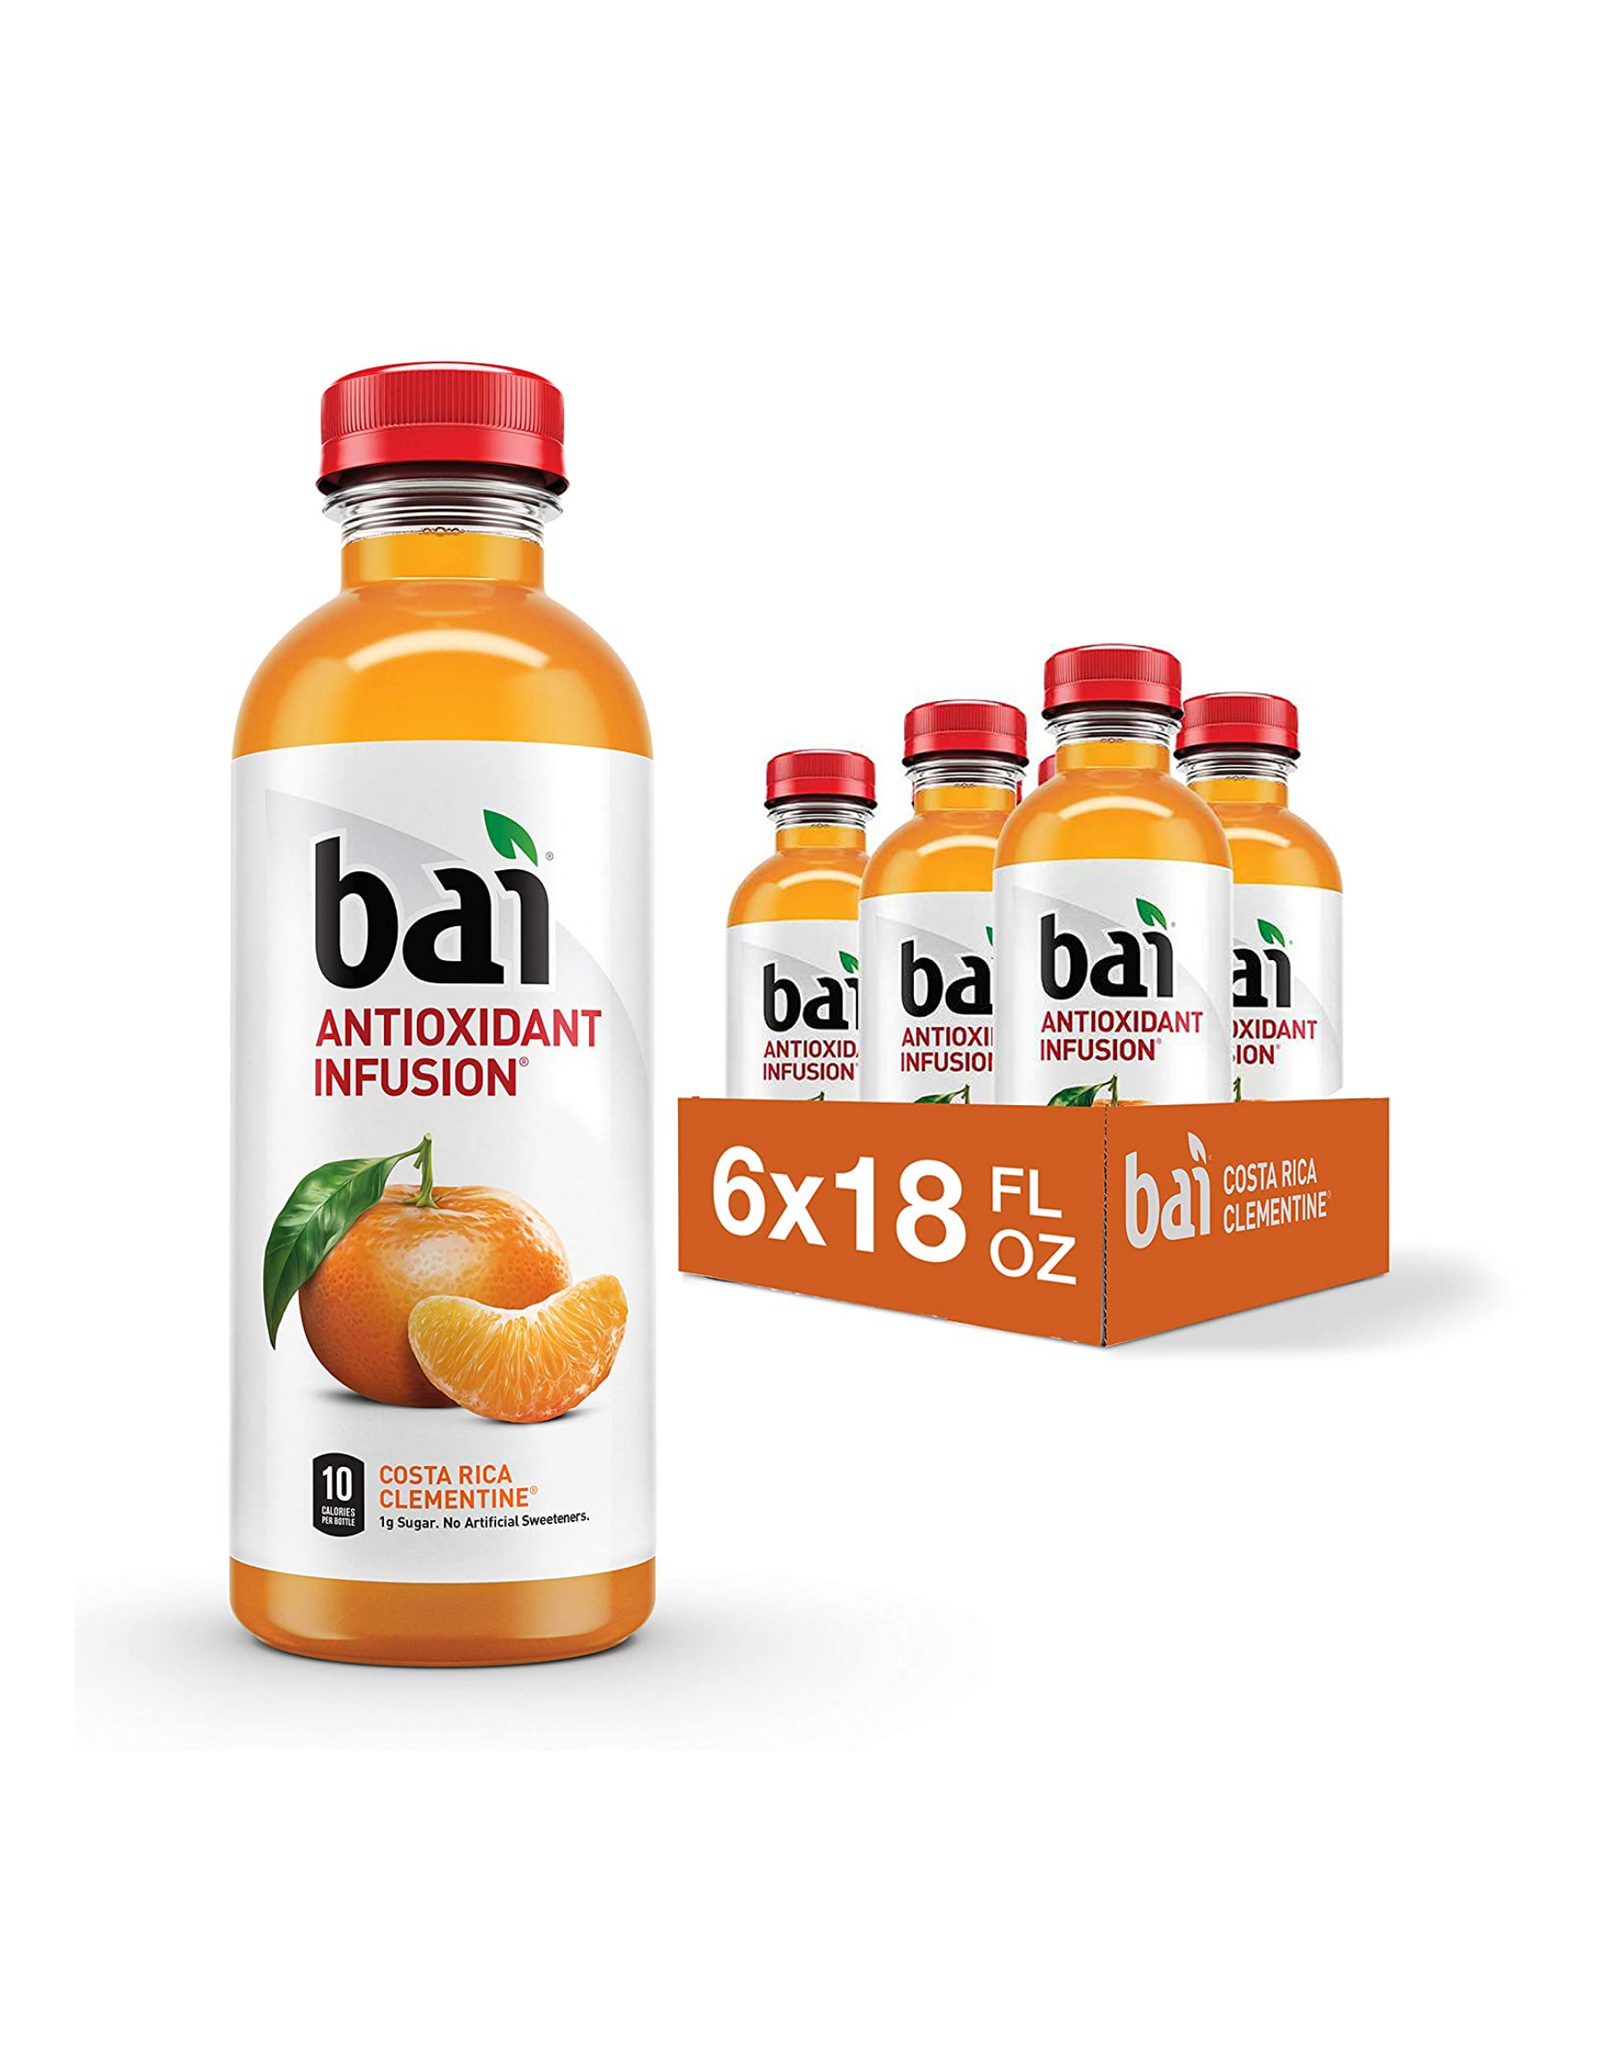 Bai Flavored Water, Costa Rica Clementine, Antioxidant Infusion Drinks, 18 fl oz (Pack of 6)